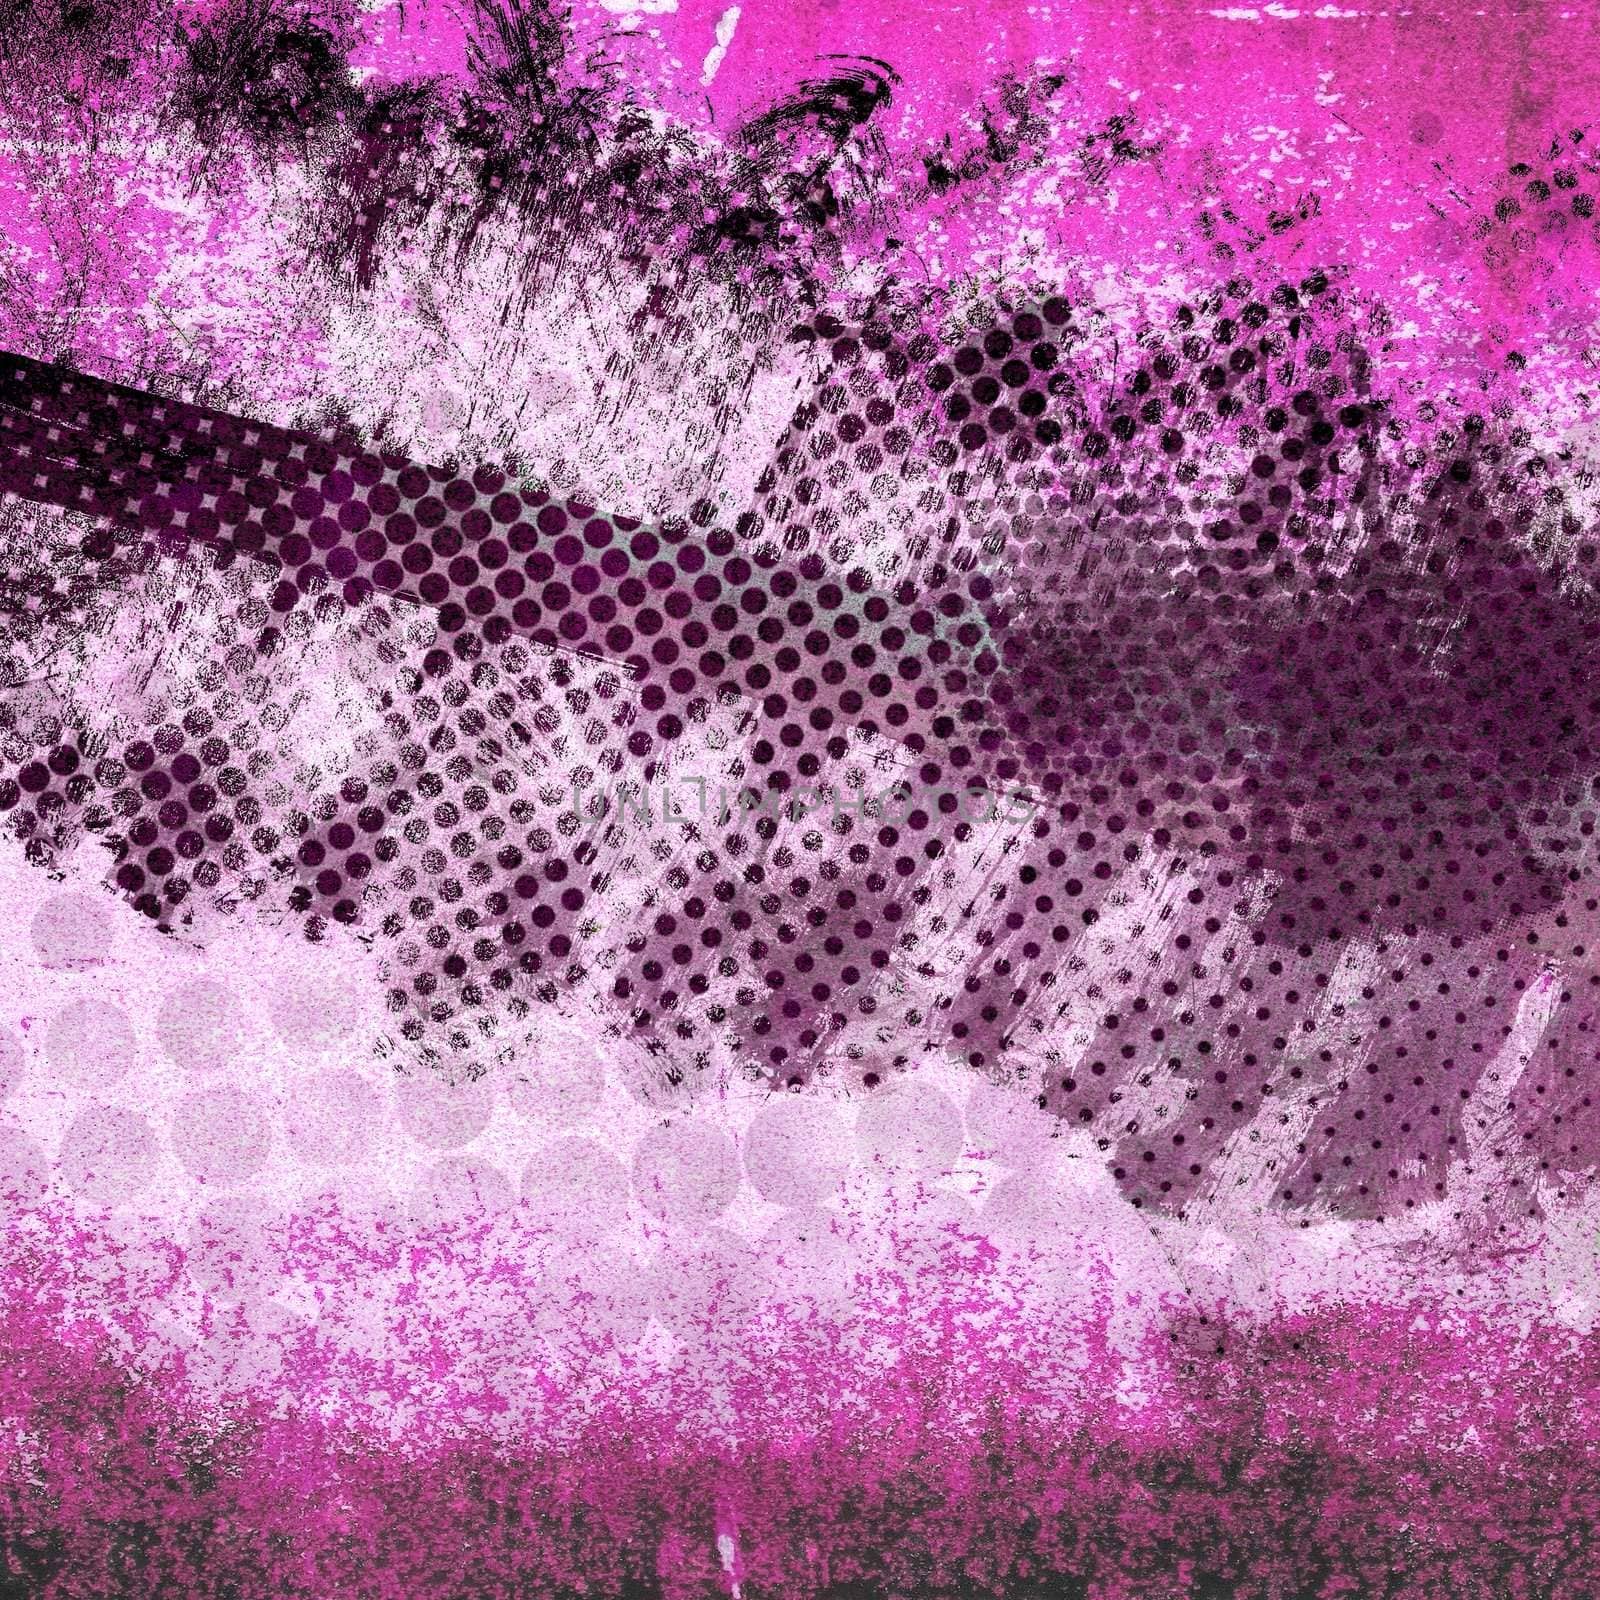 Grunge halftone gradient texture by jeremywhat